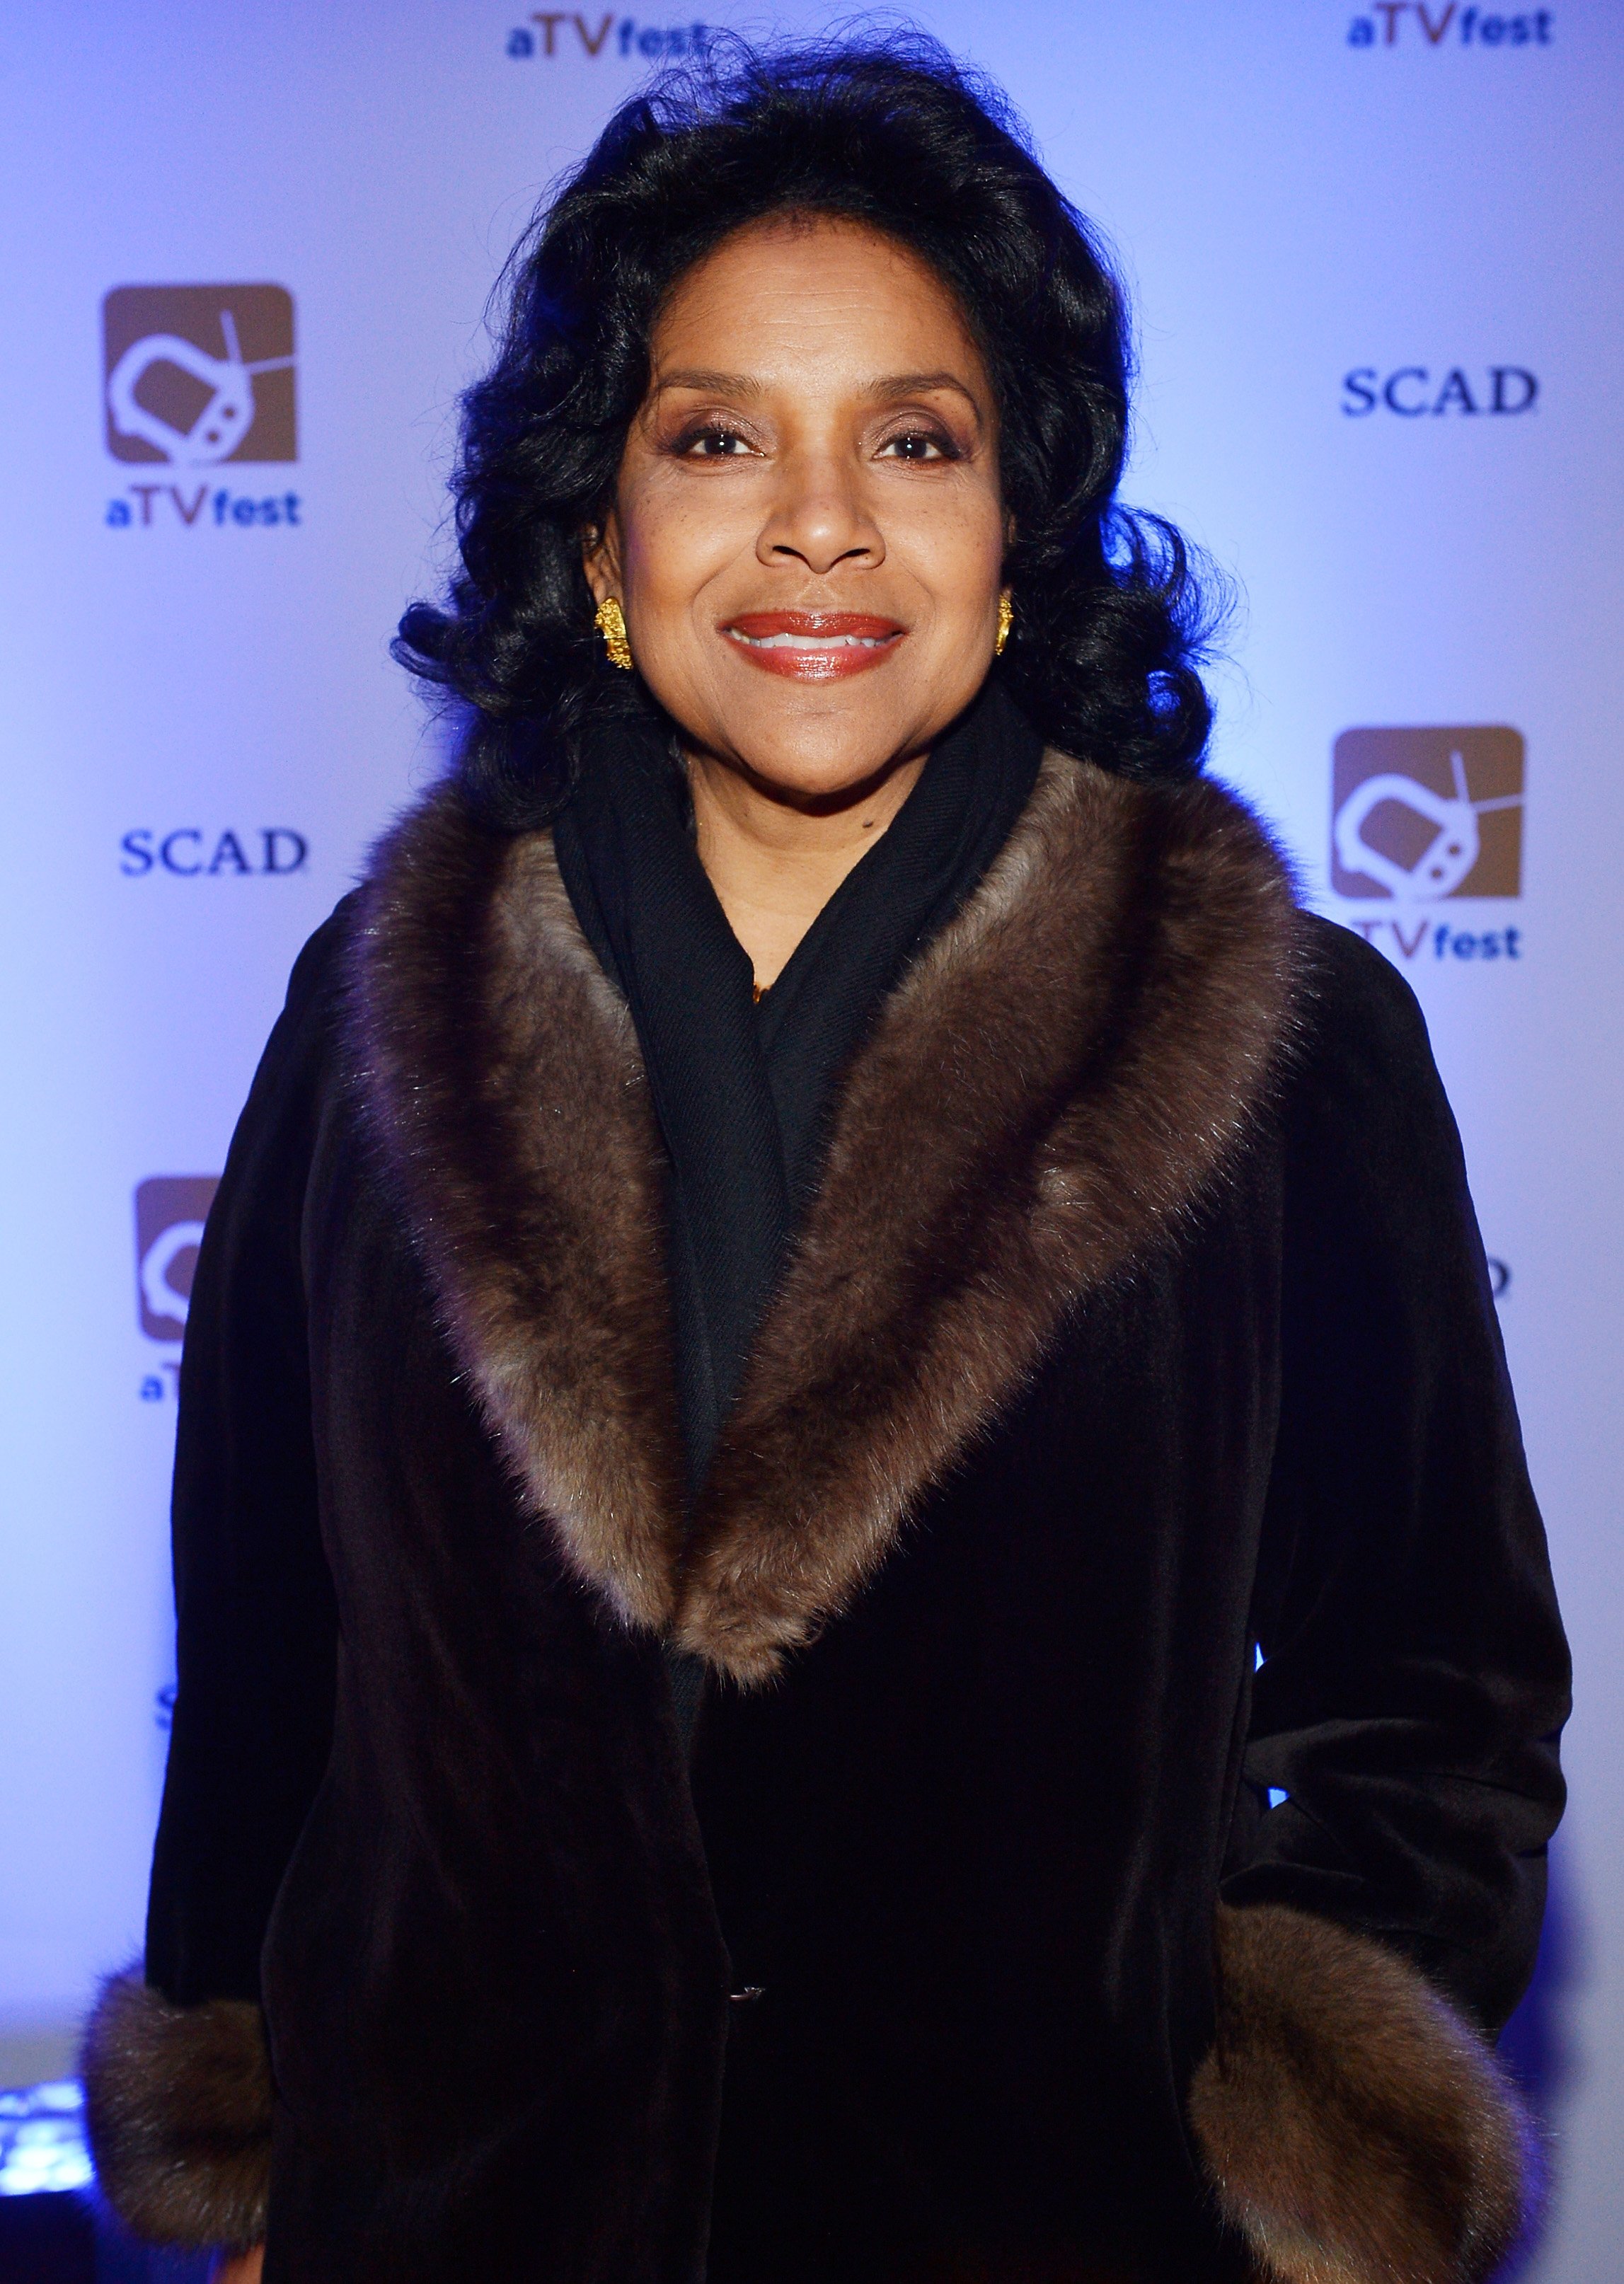 Actor Phylicia Rashad during the Inaugural aTVfest presented by (SCAD) Savannah College on February 16, 2013 | Photo: Getty Images